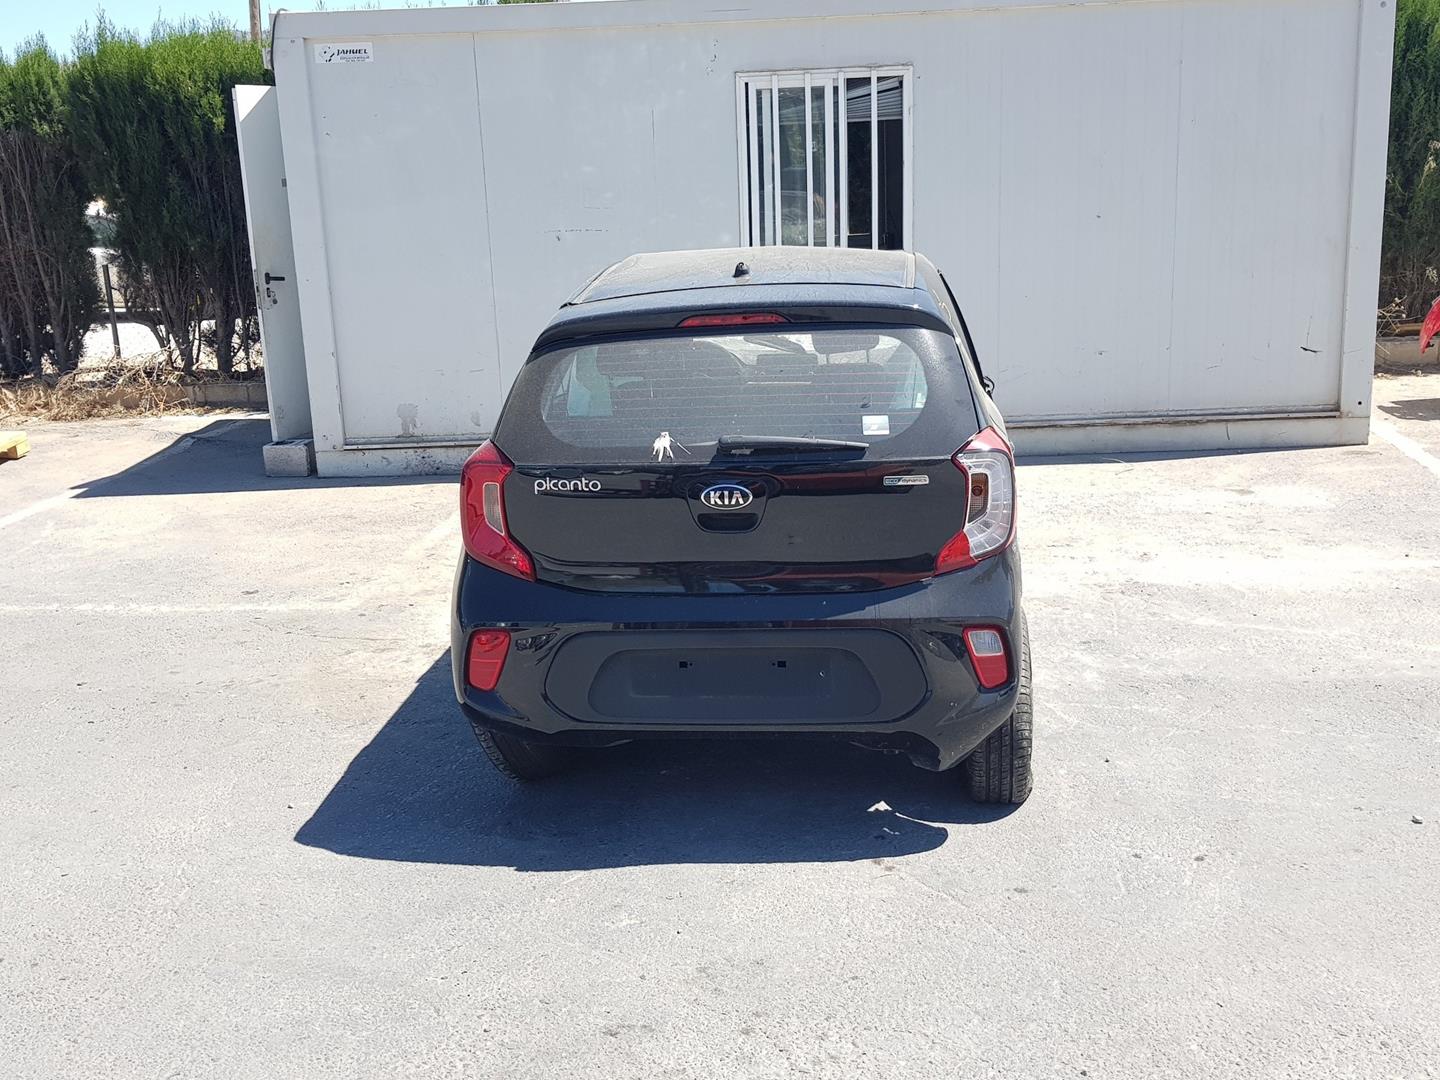 KIA Picanto 2 generation (2011-2017) Other parts of headlamps 92405G6 24050918